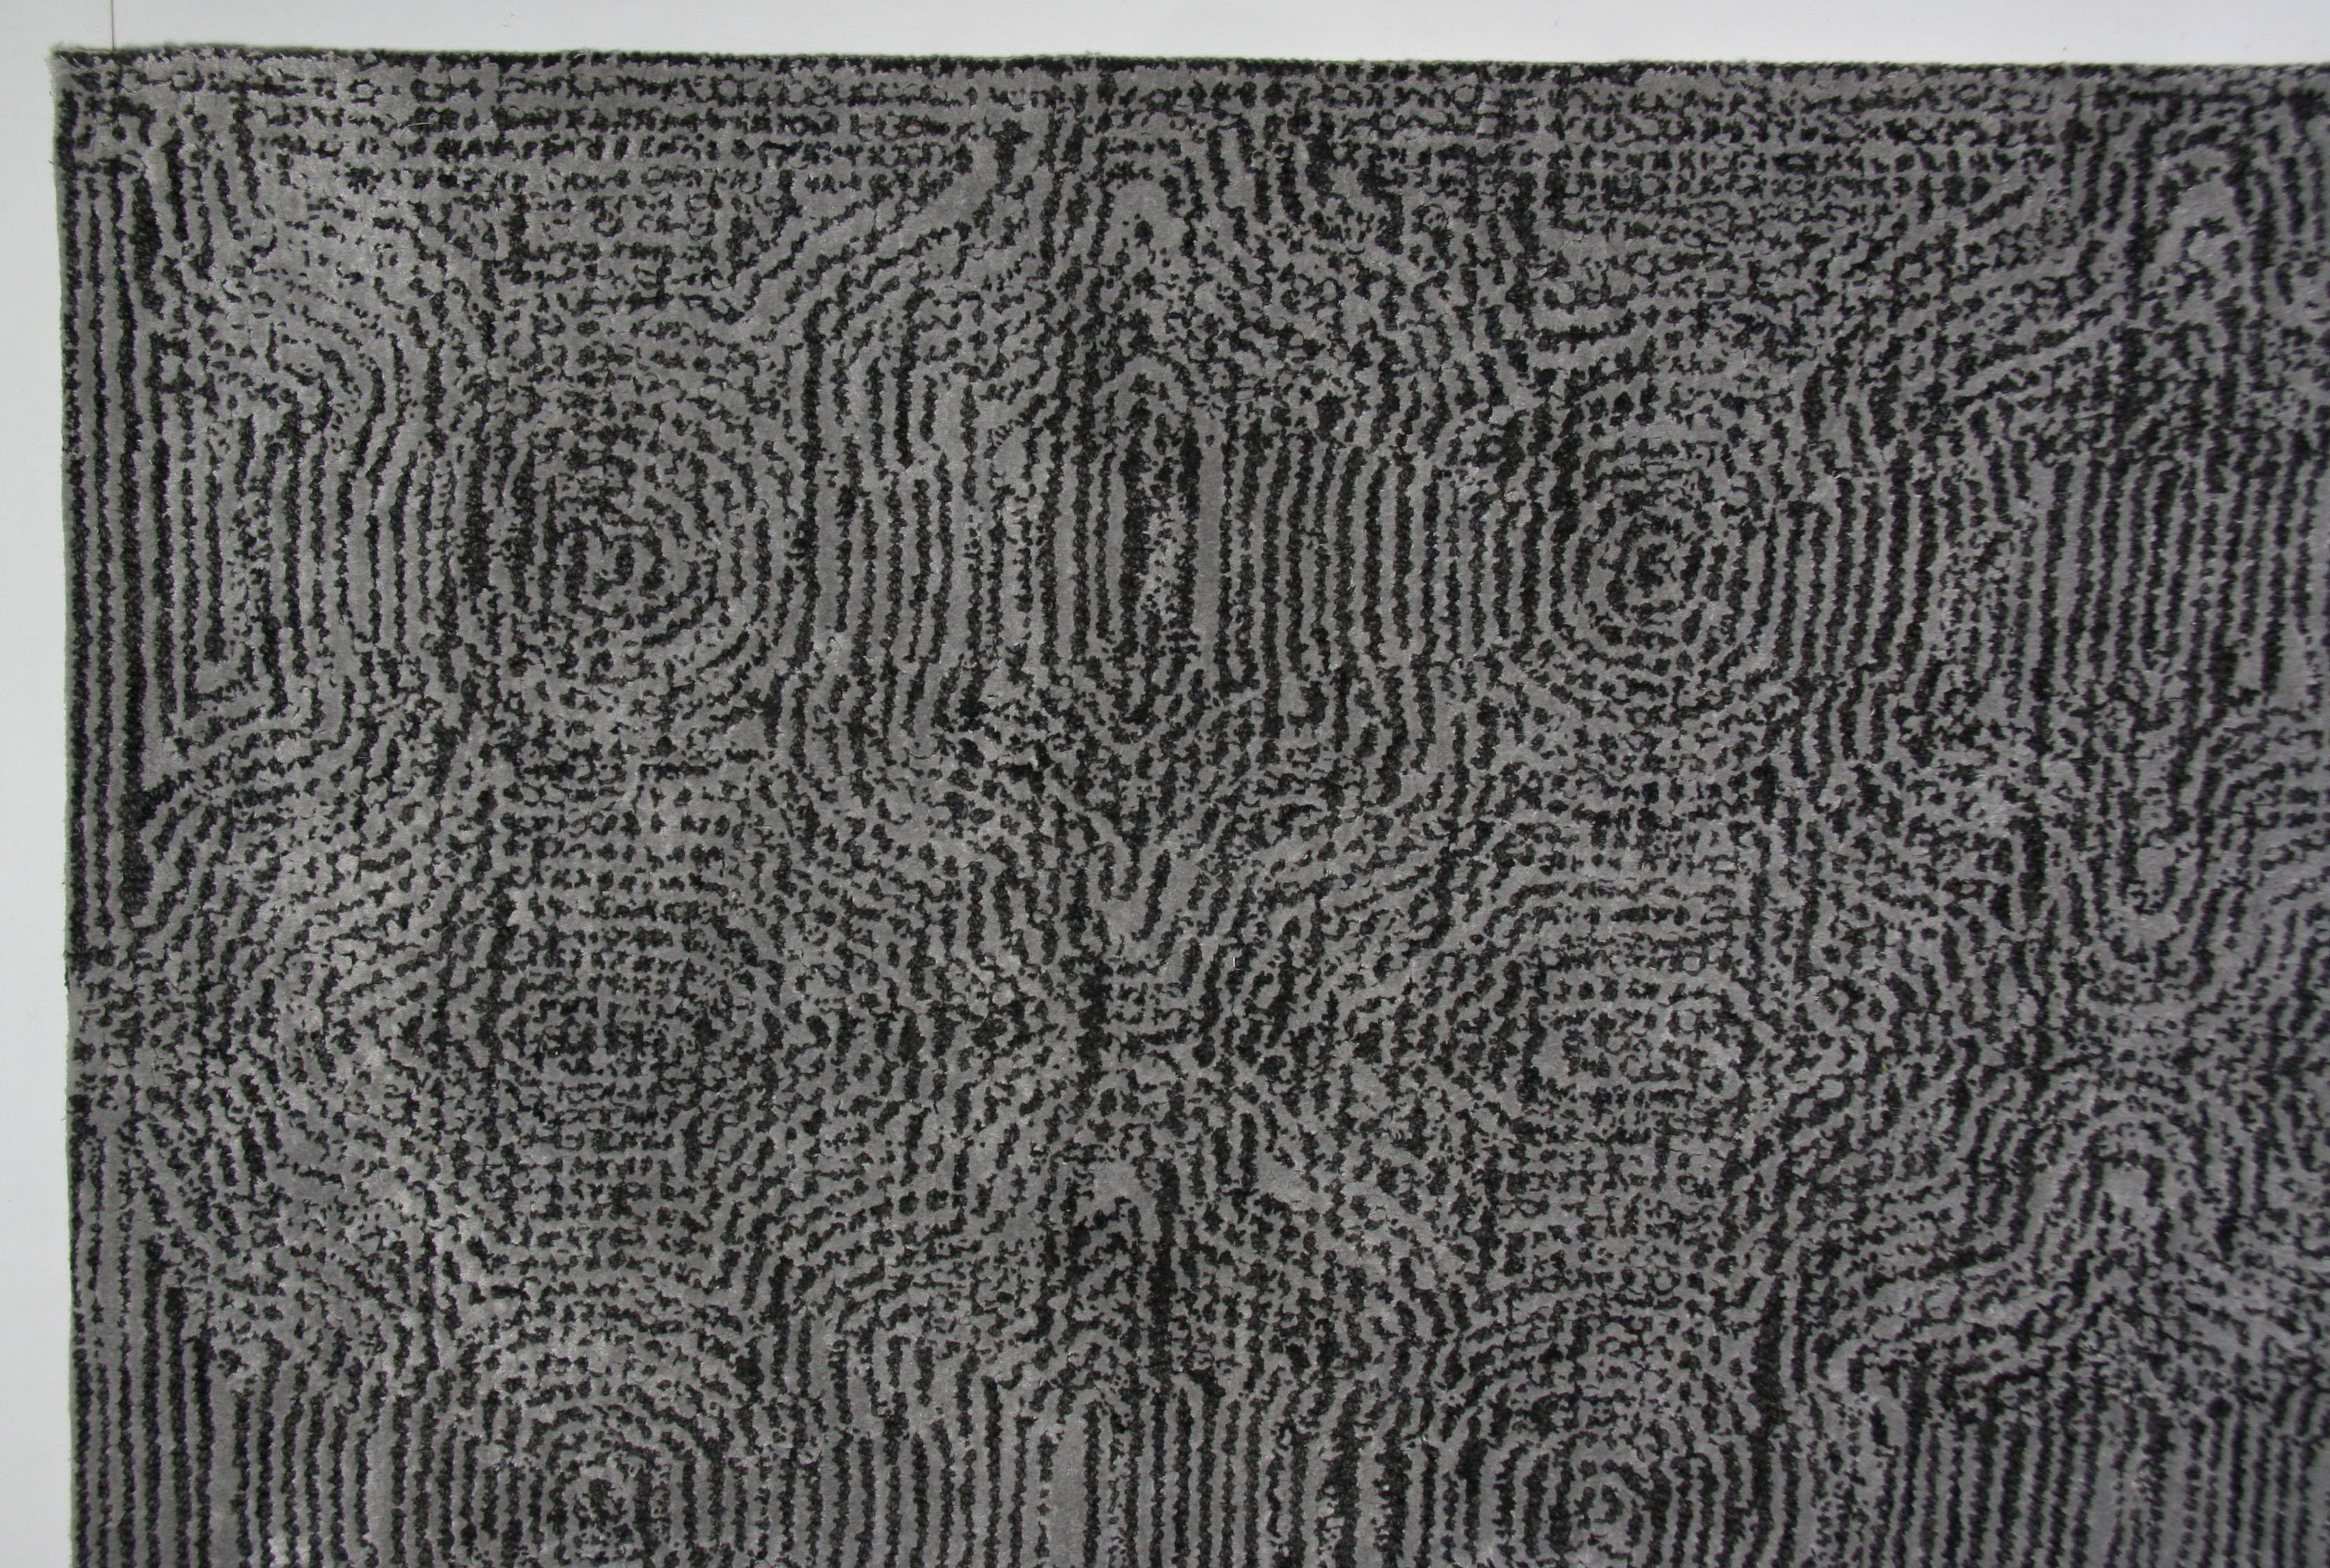 Swirling lines create a vibrancy and sense of motion in this contemporary rug for the modern home or office. Great for drawing attention to favorite furniture or use it on its own a design element in its own right. 

Wool/viscose blend brings